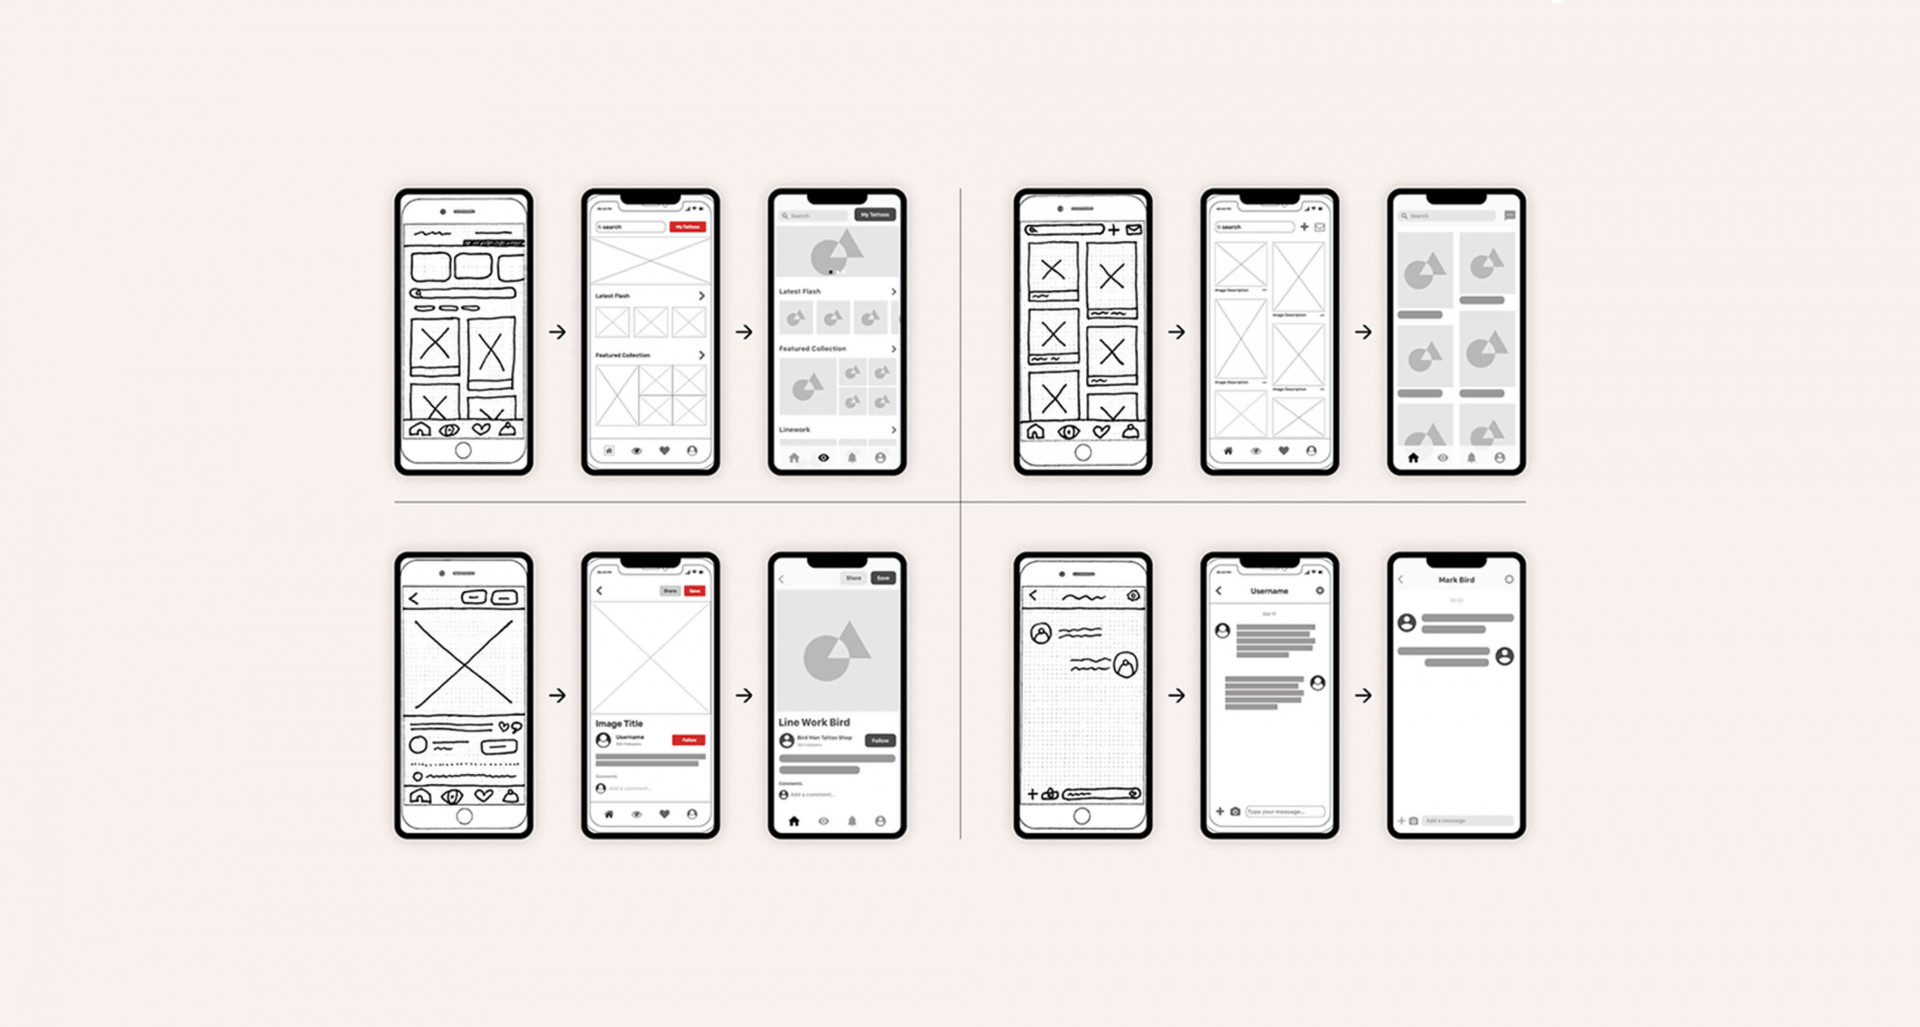 How to Make UX Accessible